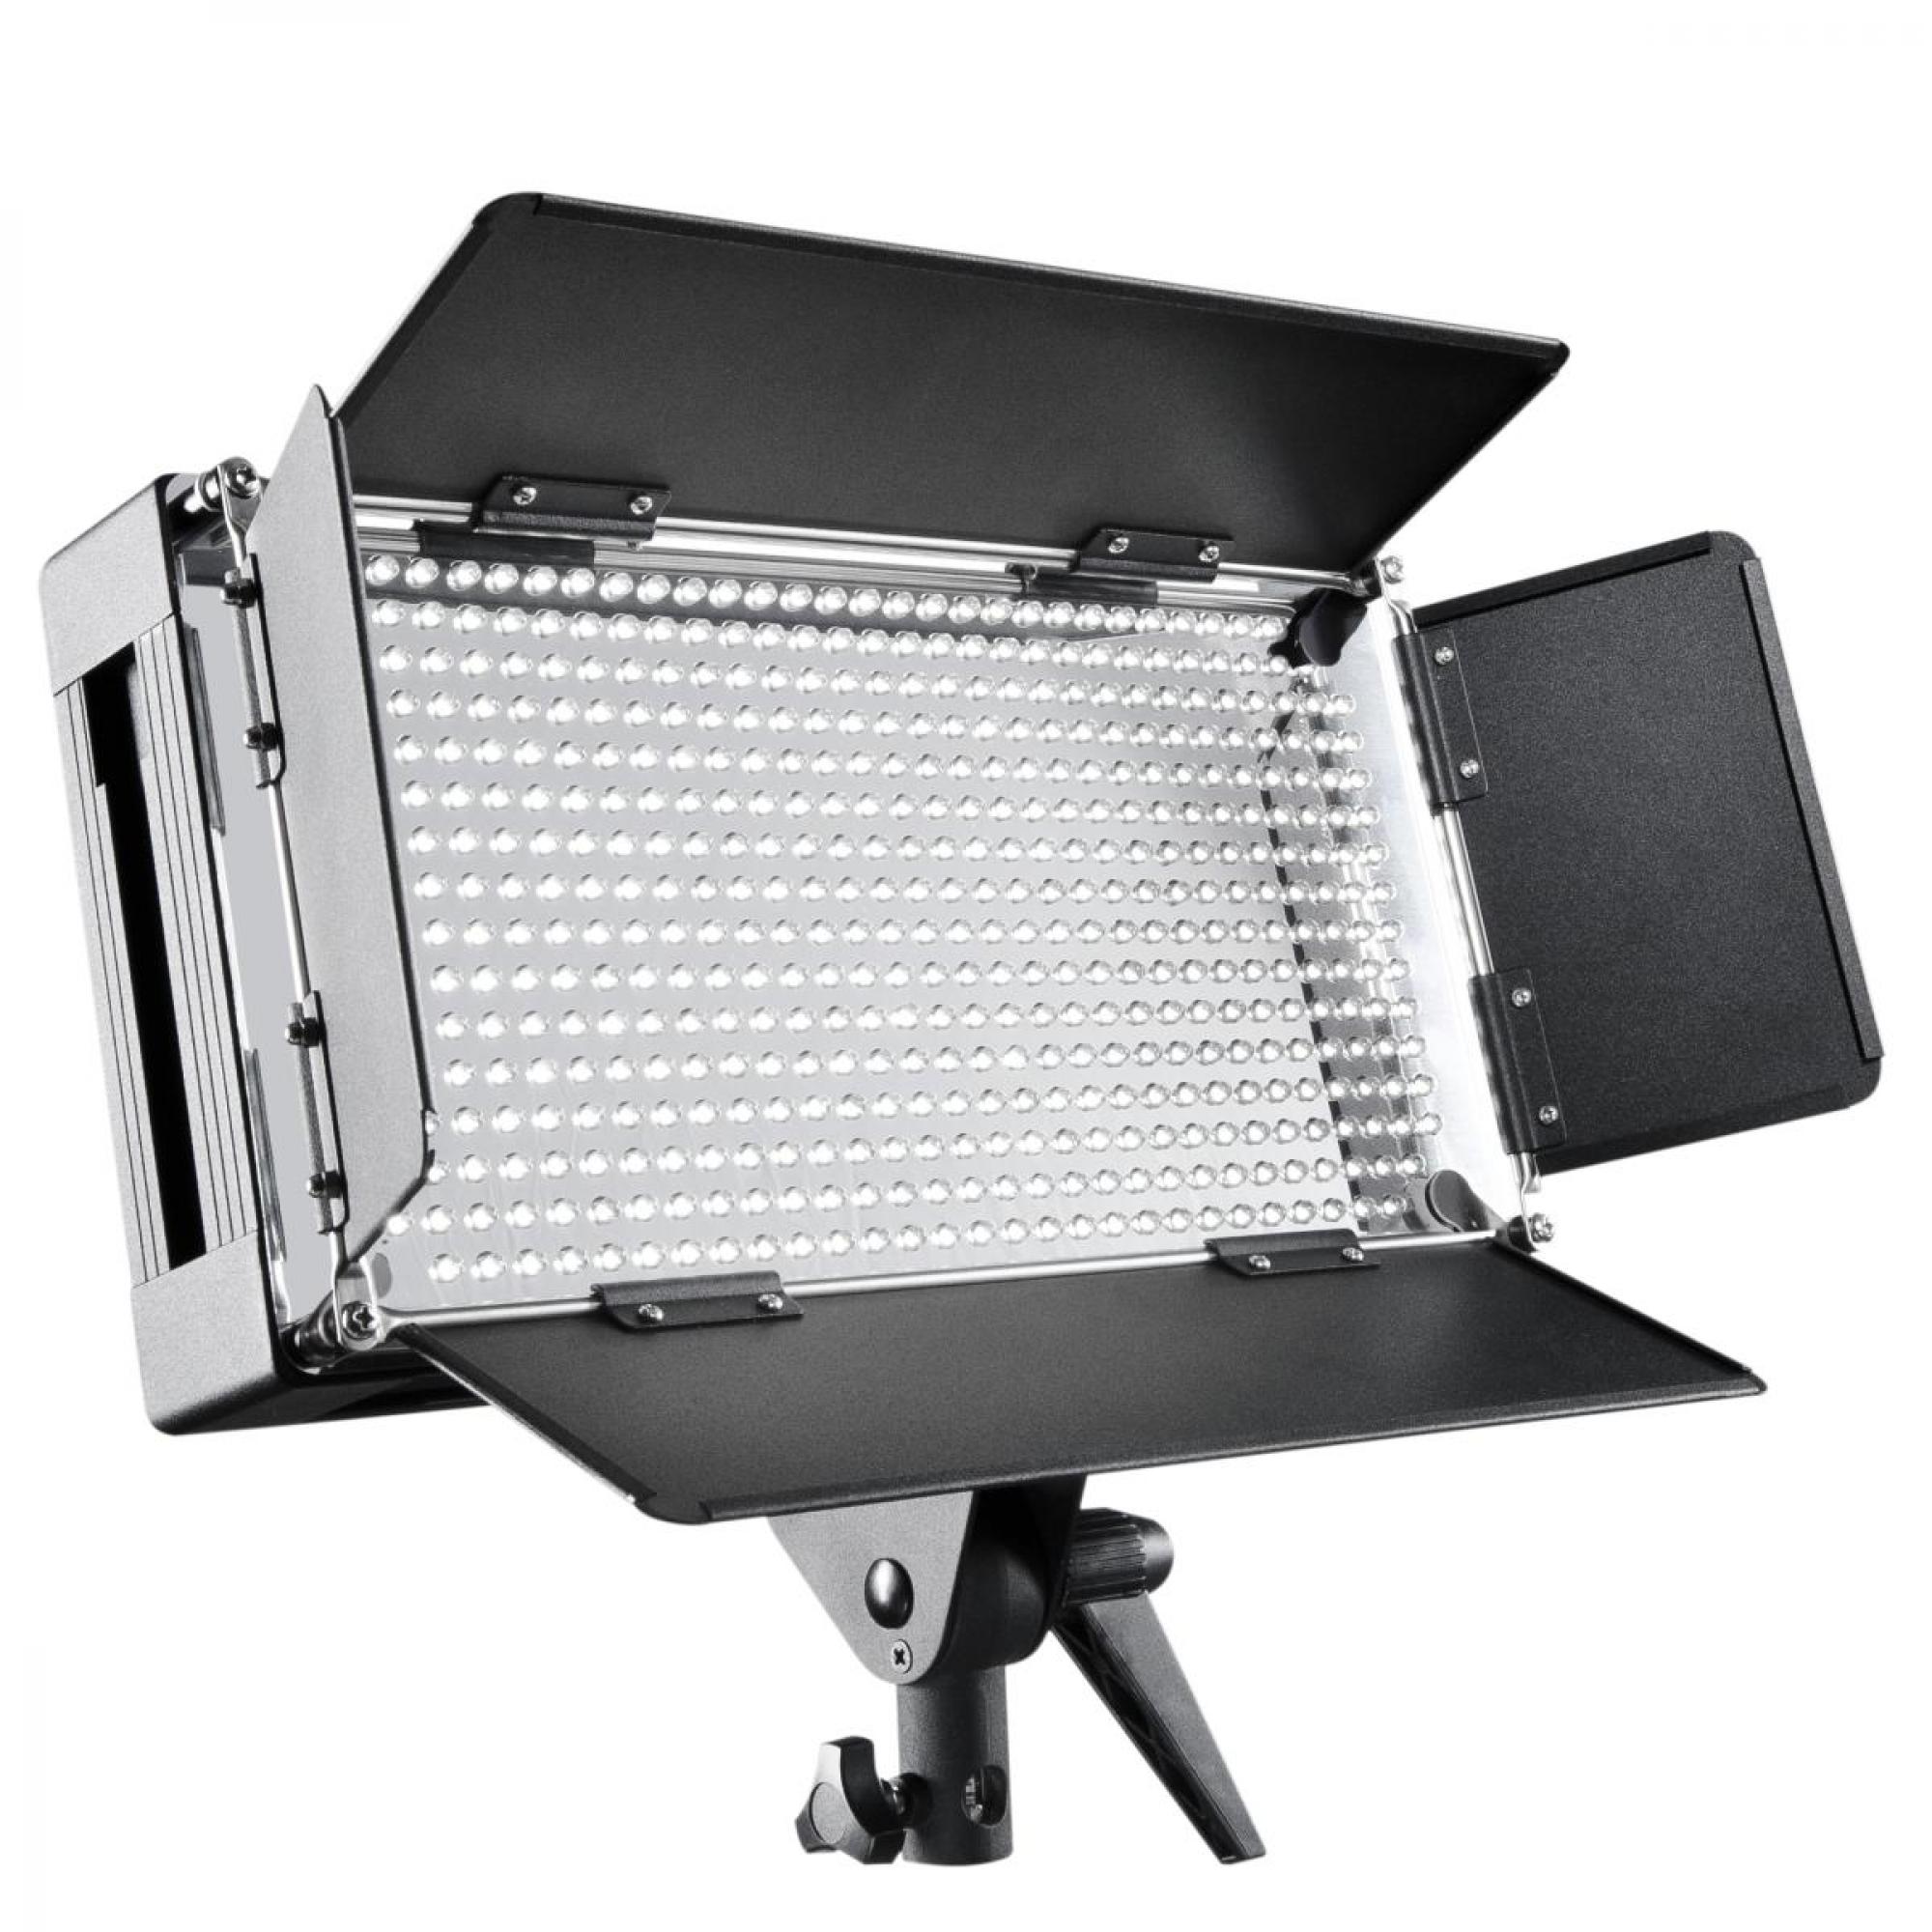 Walimex Pro LED 500 Dimmbare Flächenleuchte 30W 17699 + Stativ WT-806 12138 20218